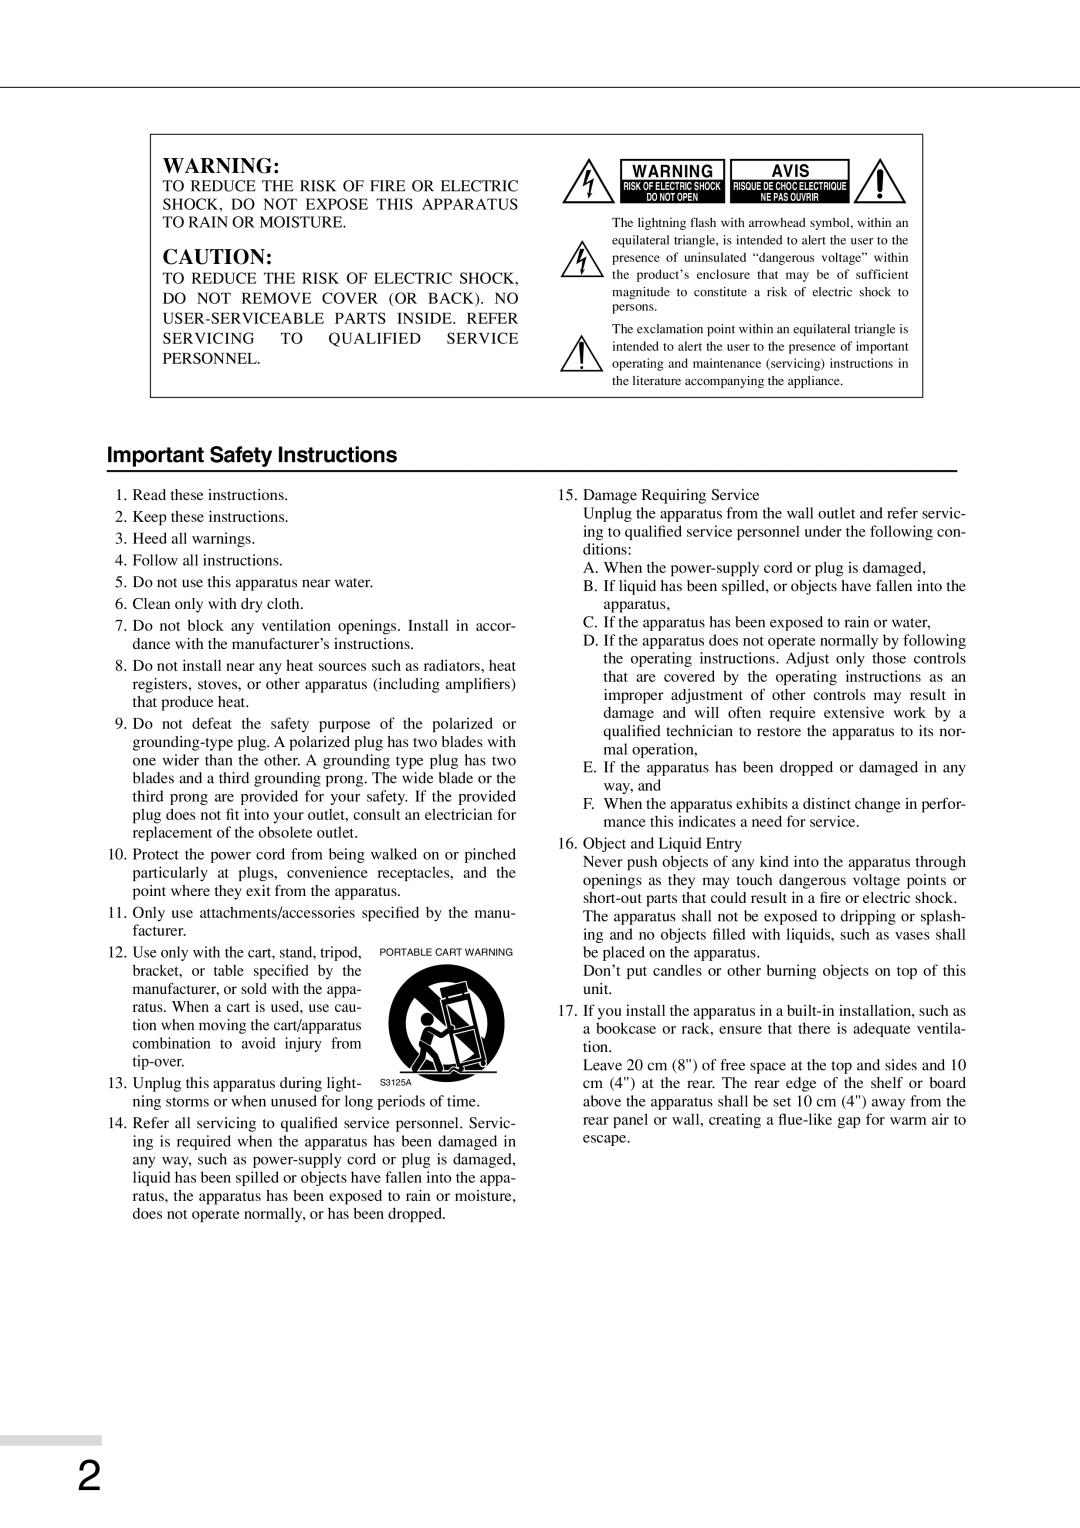 Eiki 8080 owner manual Important Safety Instructions, Avis 